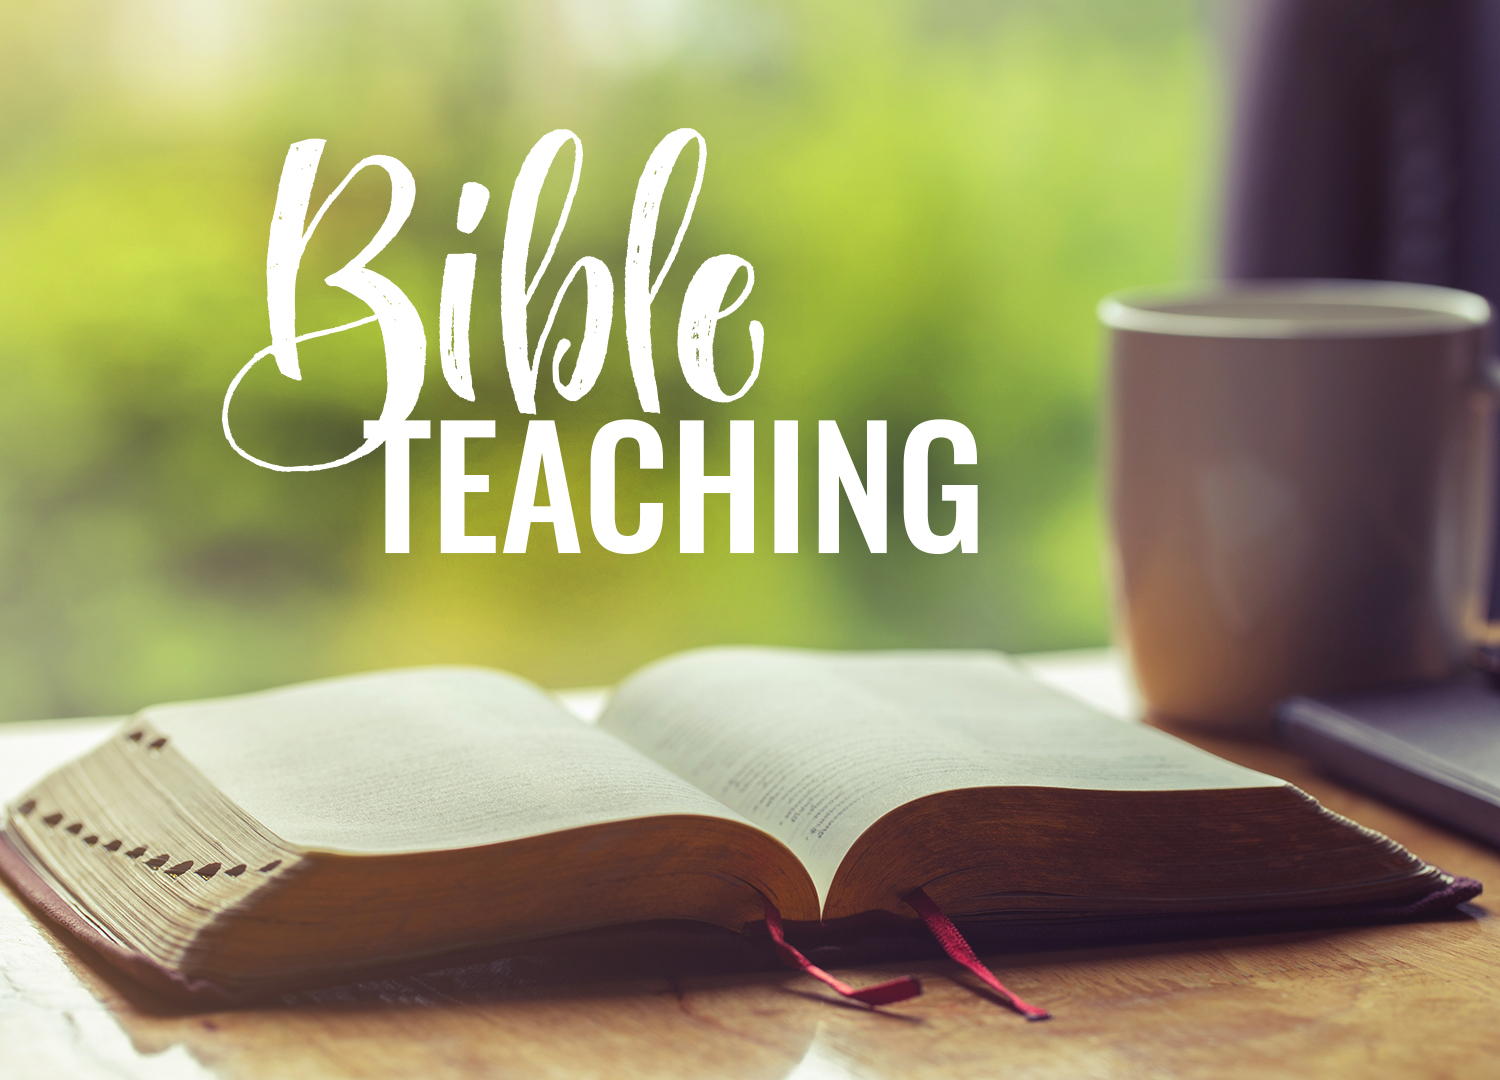 Overlaid text: Bible Teaching. Background: A cup of coffee and a bible sit on a table